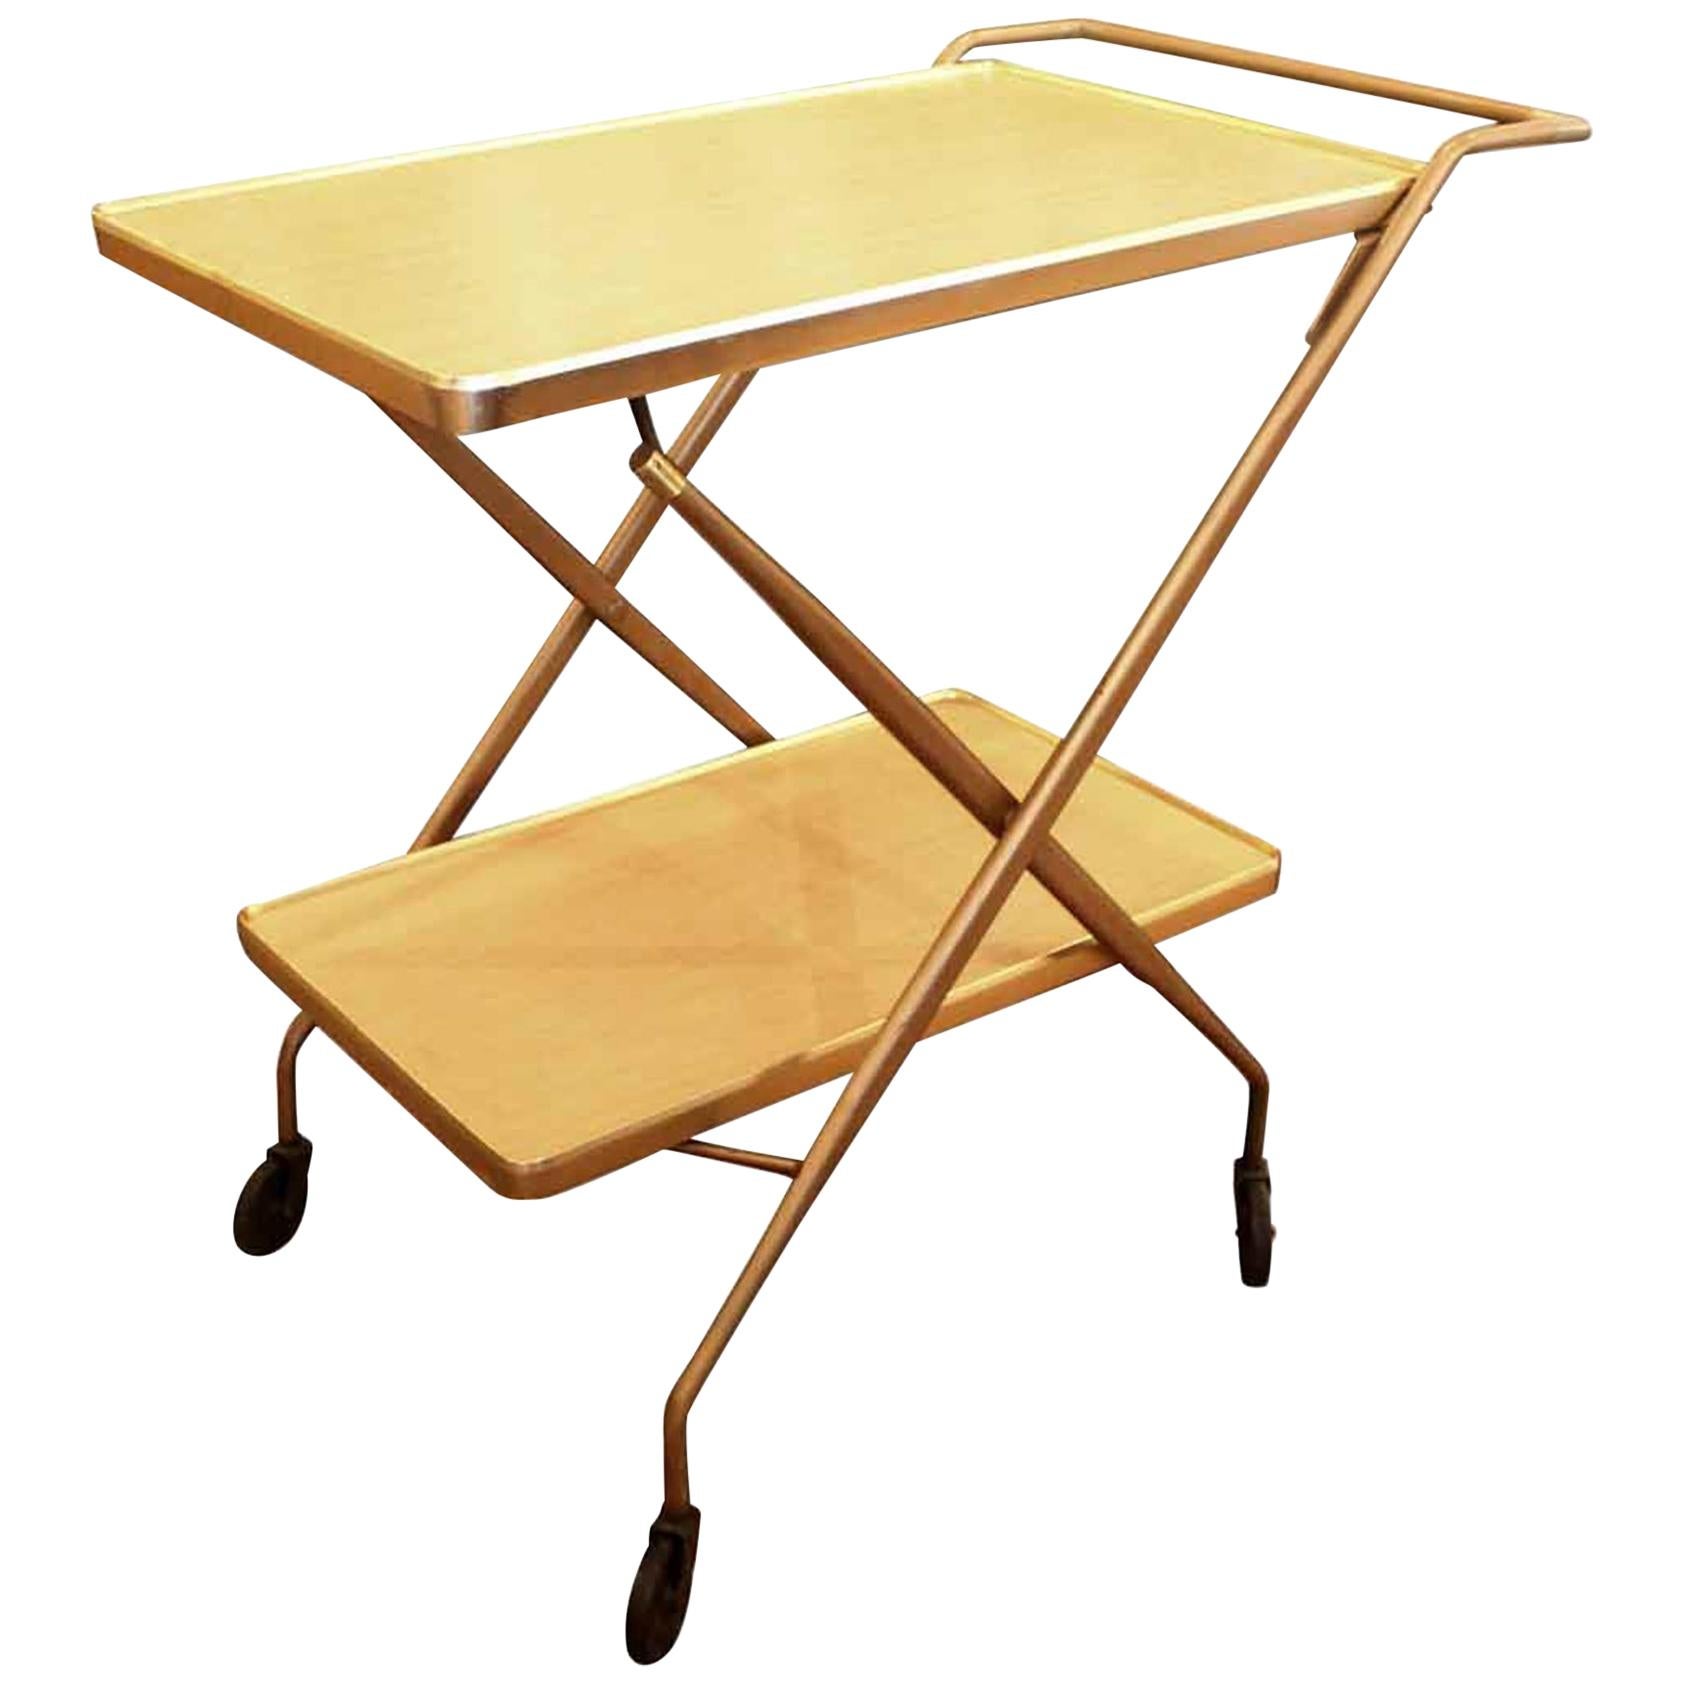 1950s Mid-Century Modern Folding Formica Bar Cart with Two Shelves